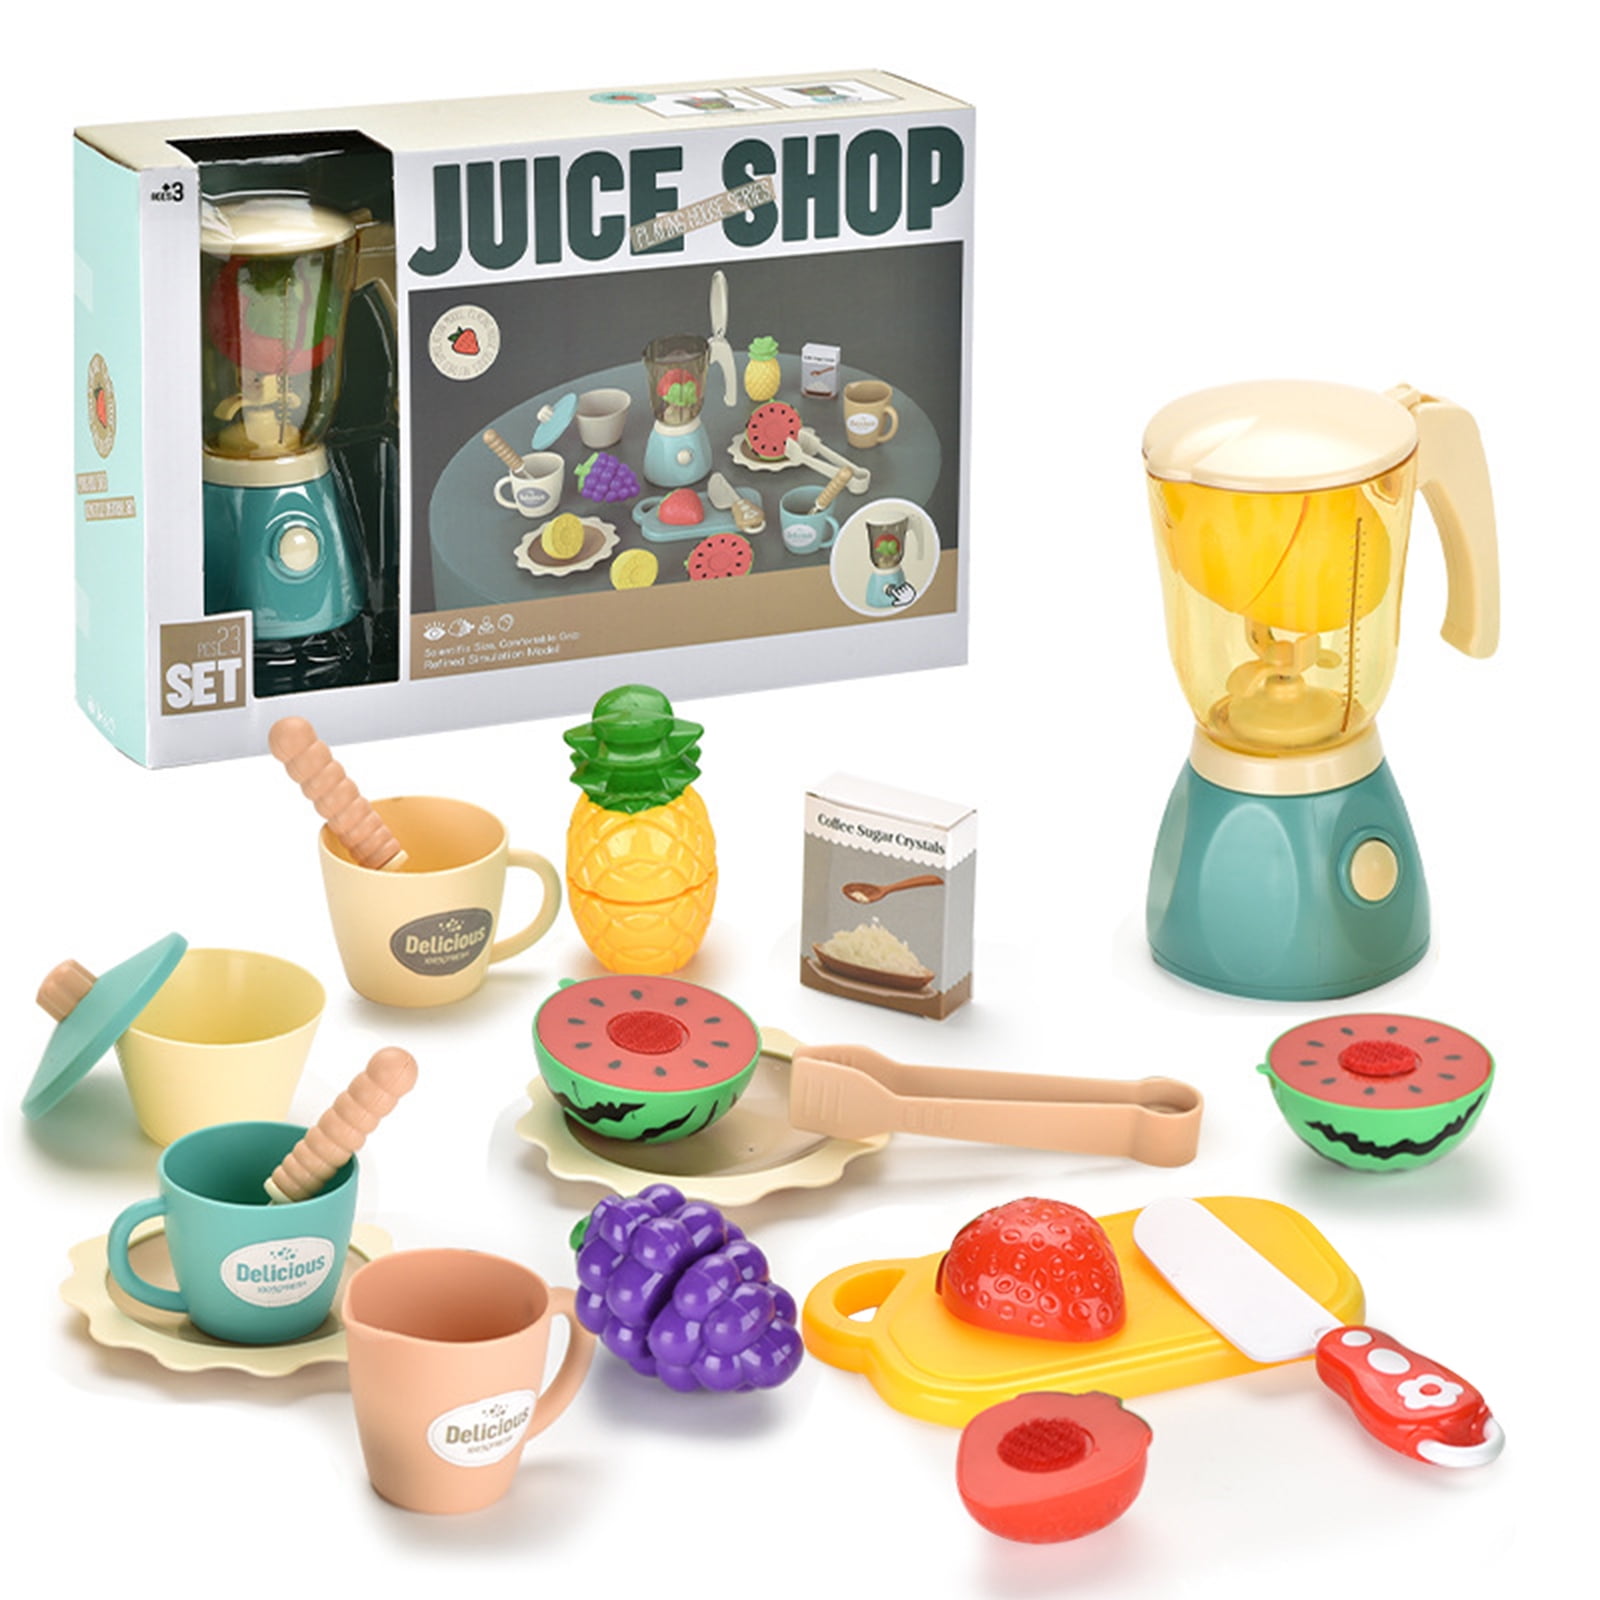 CP Toys My Blender Toy | Ages 3+ Years for Preschool, Children, Gift, Play  Kitchen Appliance